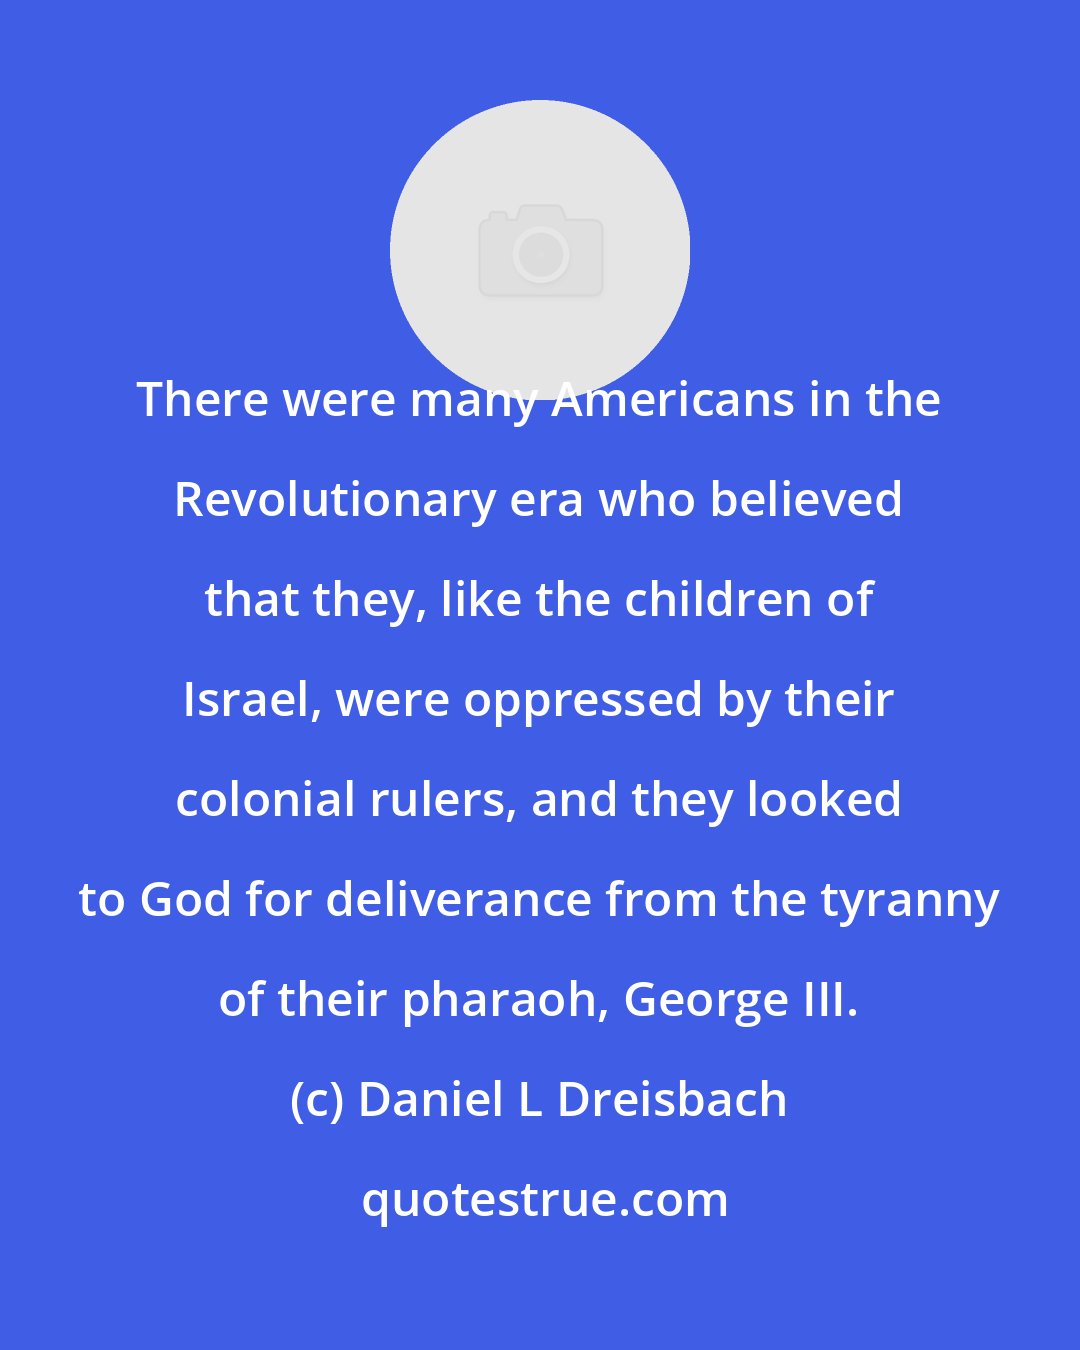 Daniel L Dreisbach: There were many Americans in the Revolutionary era who believed that they, like the children of Israel, were oppressed by their colonial rulers, and they looked to God for deliverance from the tyranny of their pharaoh, George III.